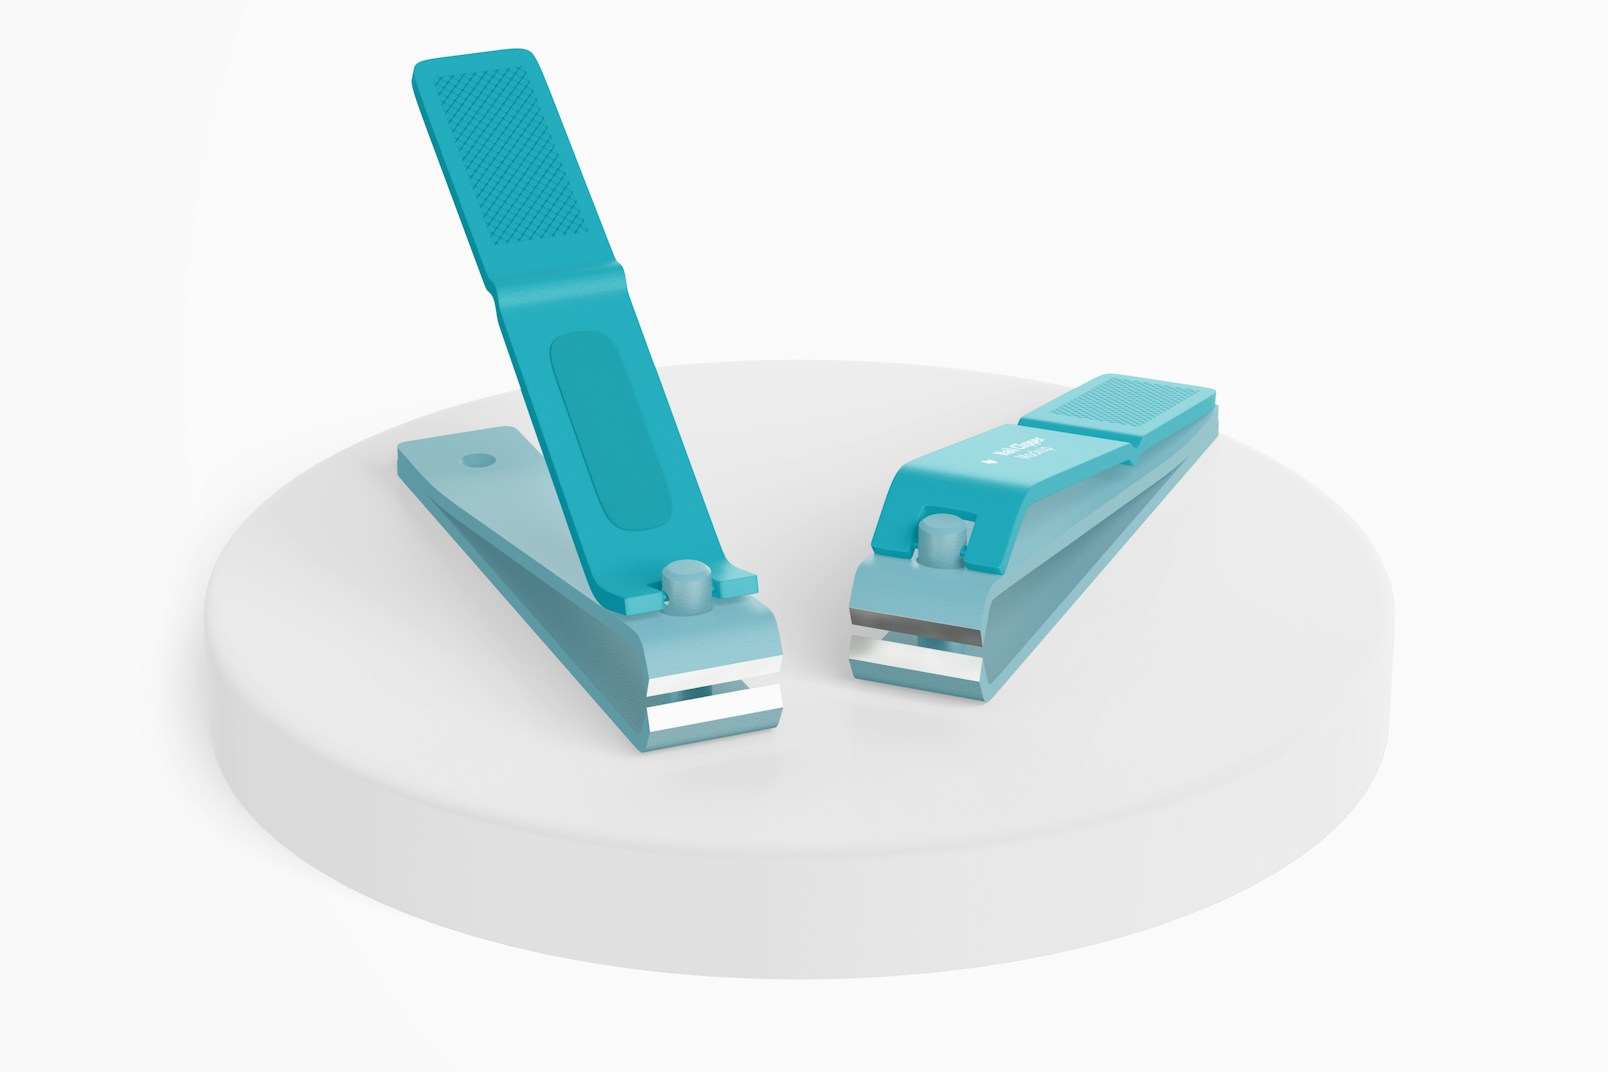 Nail Clipper Mockup, Opened and Closed